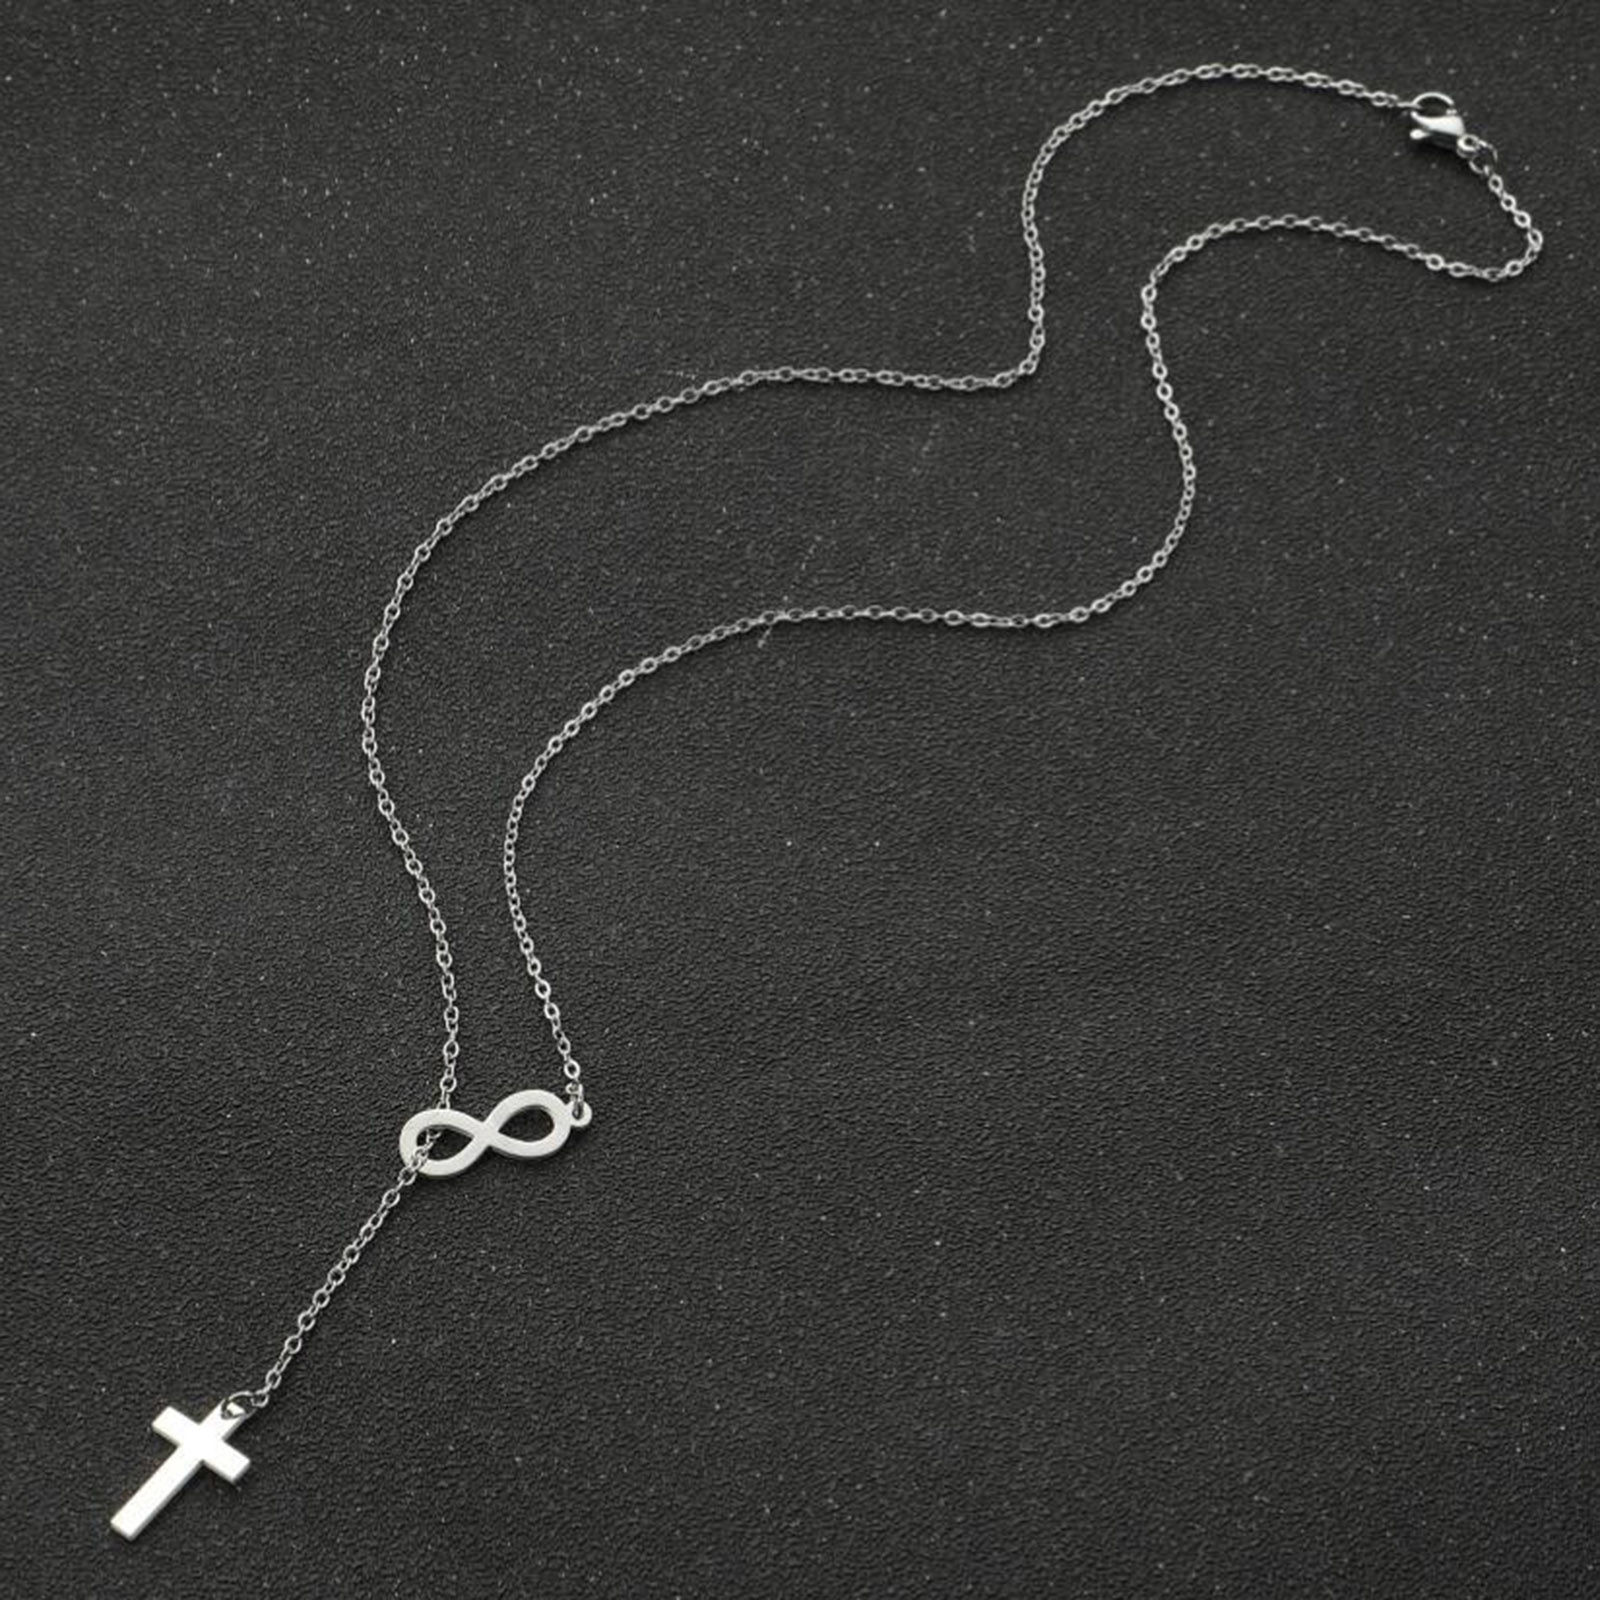 Picture of Titanium Steel Stylish Y Shaped Lariat Necklace Silver Tone Infinity Symbol Cross 45cm(17 6/8") long, 1 Piece